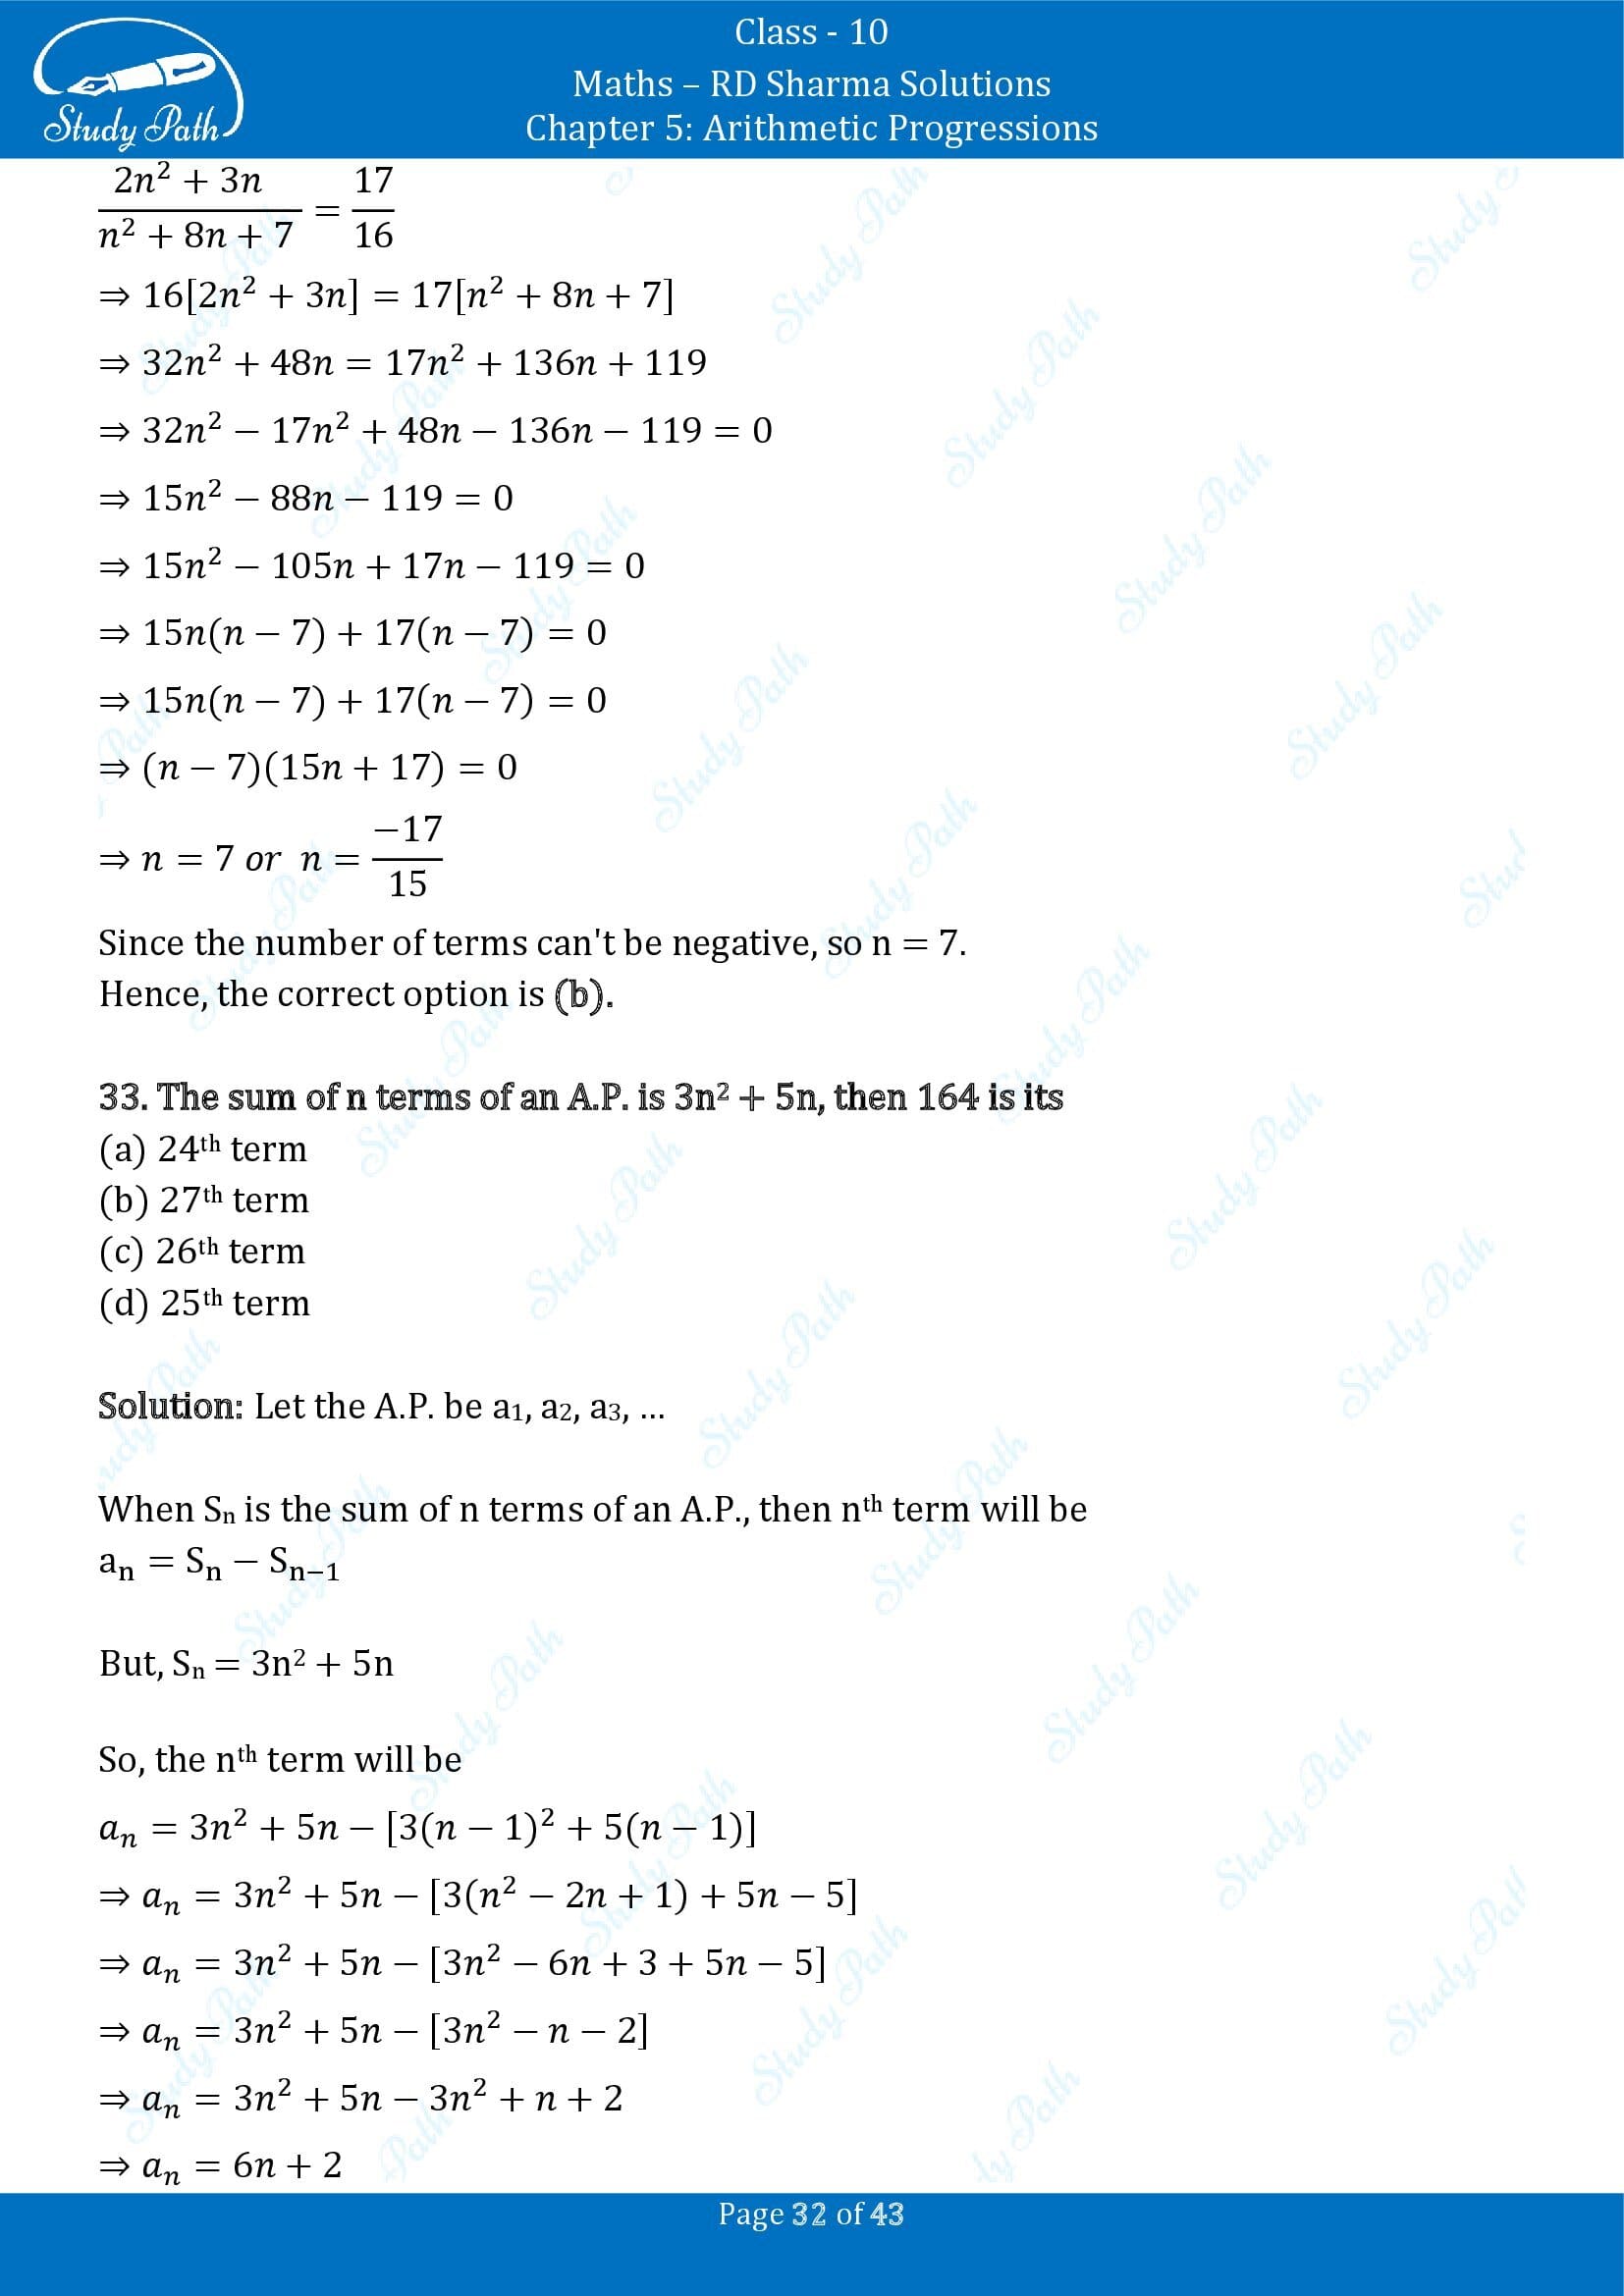 RD Sharma Solutions Class 10 Chapter 5 Arithmetic Progressions Multiple Choice Question MCQs 00032